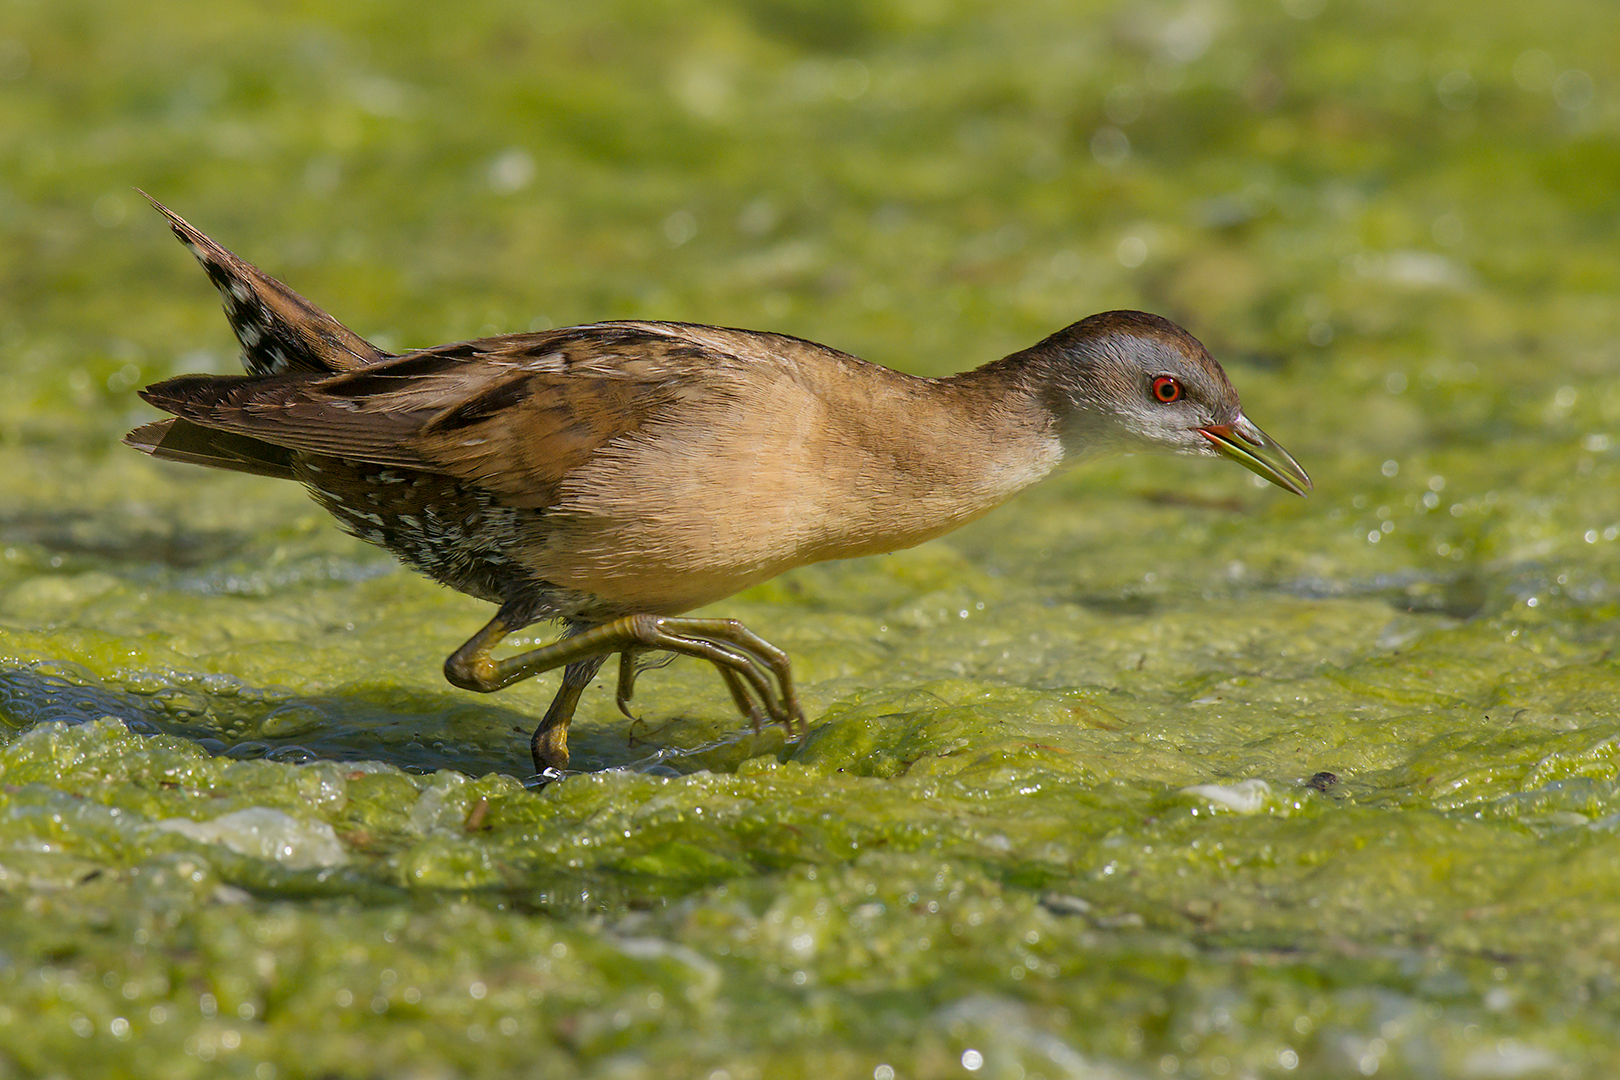 Crake in search of food...